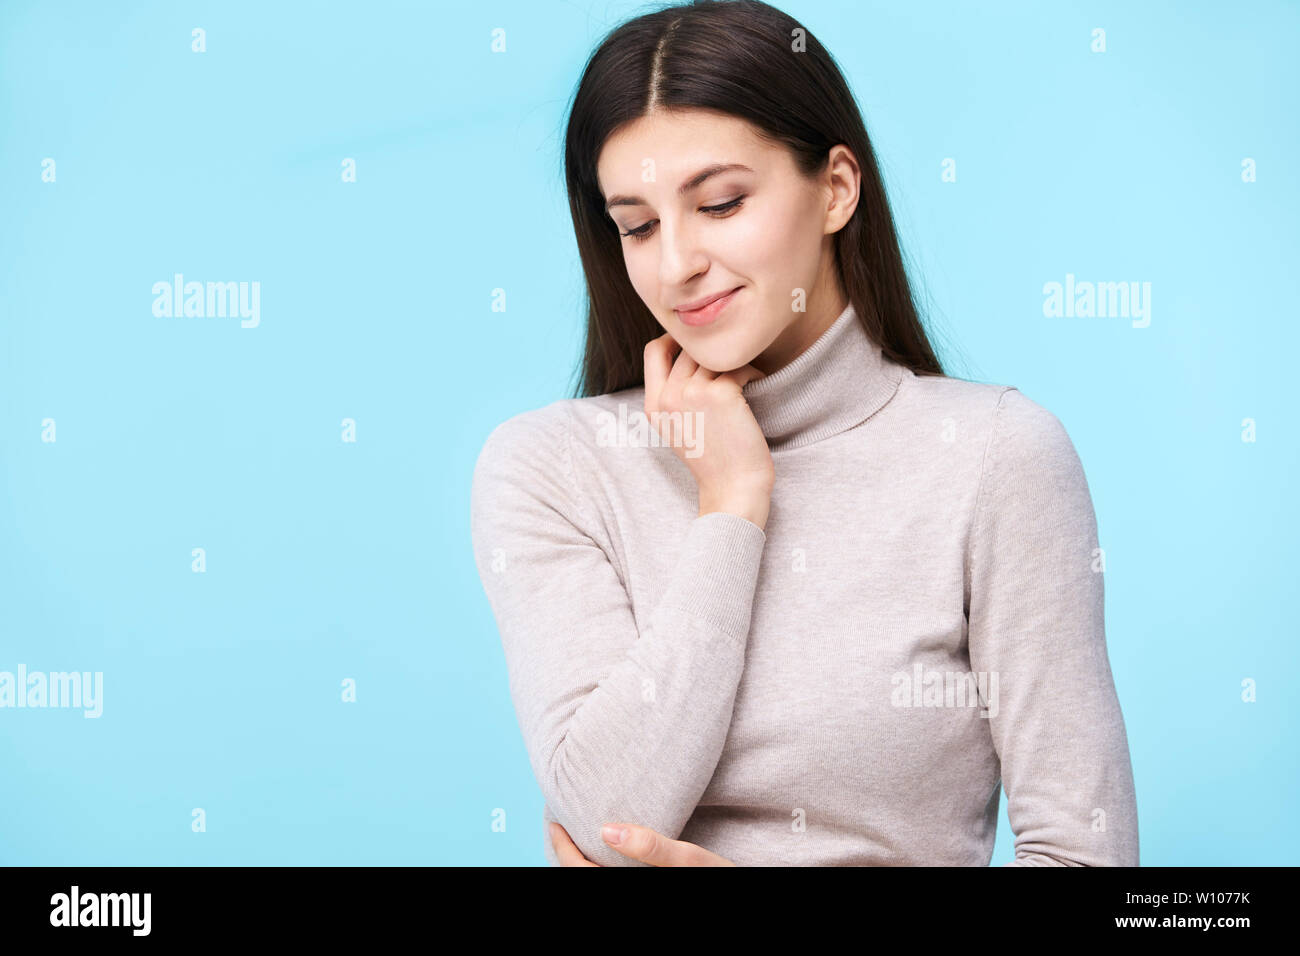 studio portrait of a beautful caucasian woman, looking down, smiling, isolated on blue background Stock Photo